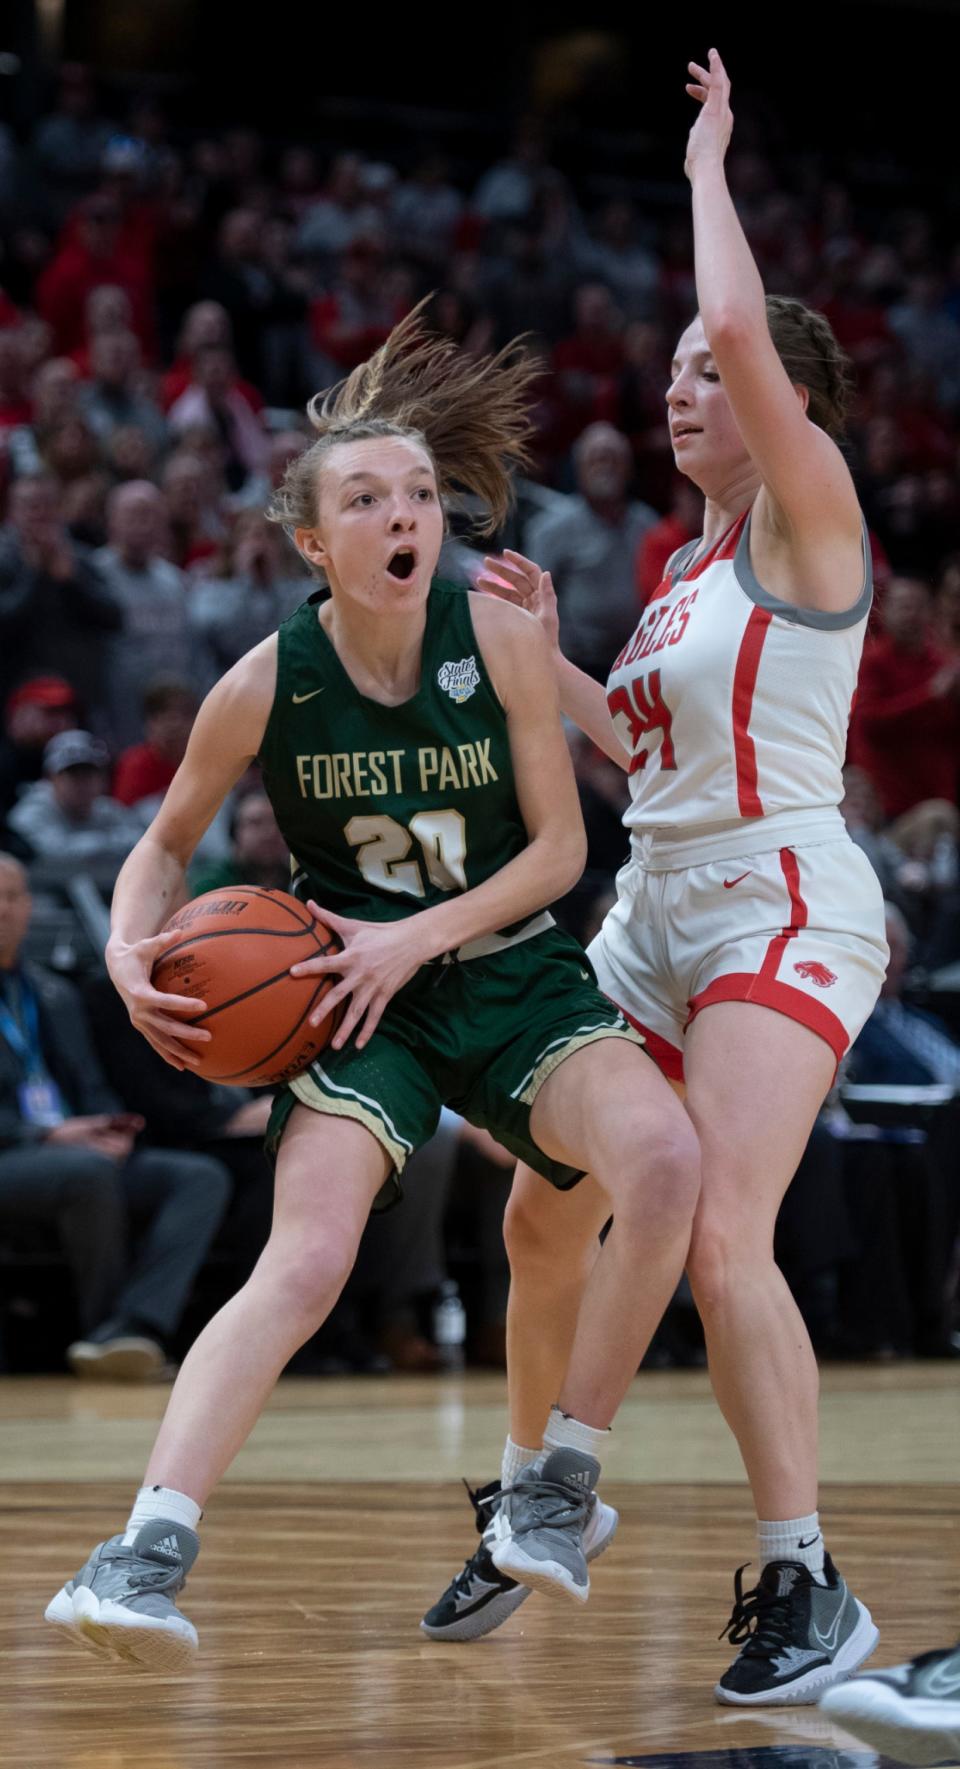 Forest Park's Danielle Eckert (20) looks to pass around Frankton's Bailee Webb (24) during the IHSAA girls basketball Class 2A state championship at Gainbridge Fieldhouse in Indianapolis, Ind., Saturday afternoon, Feb. 26, 2022.